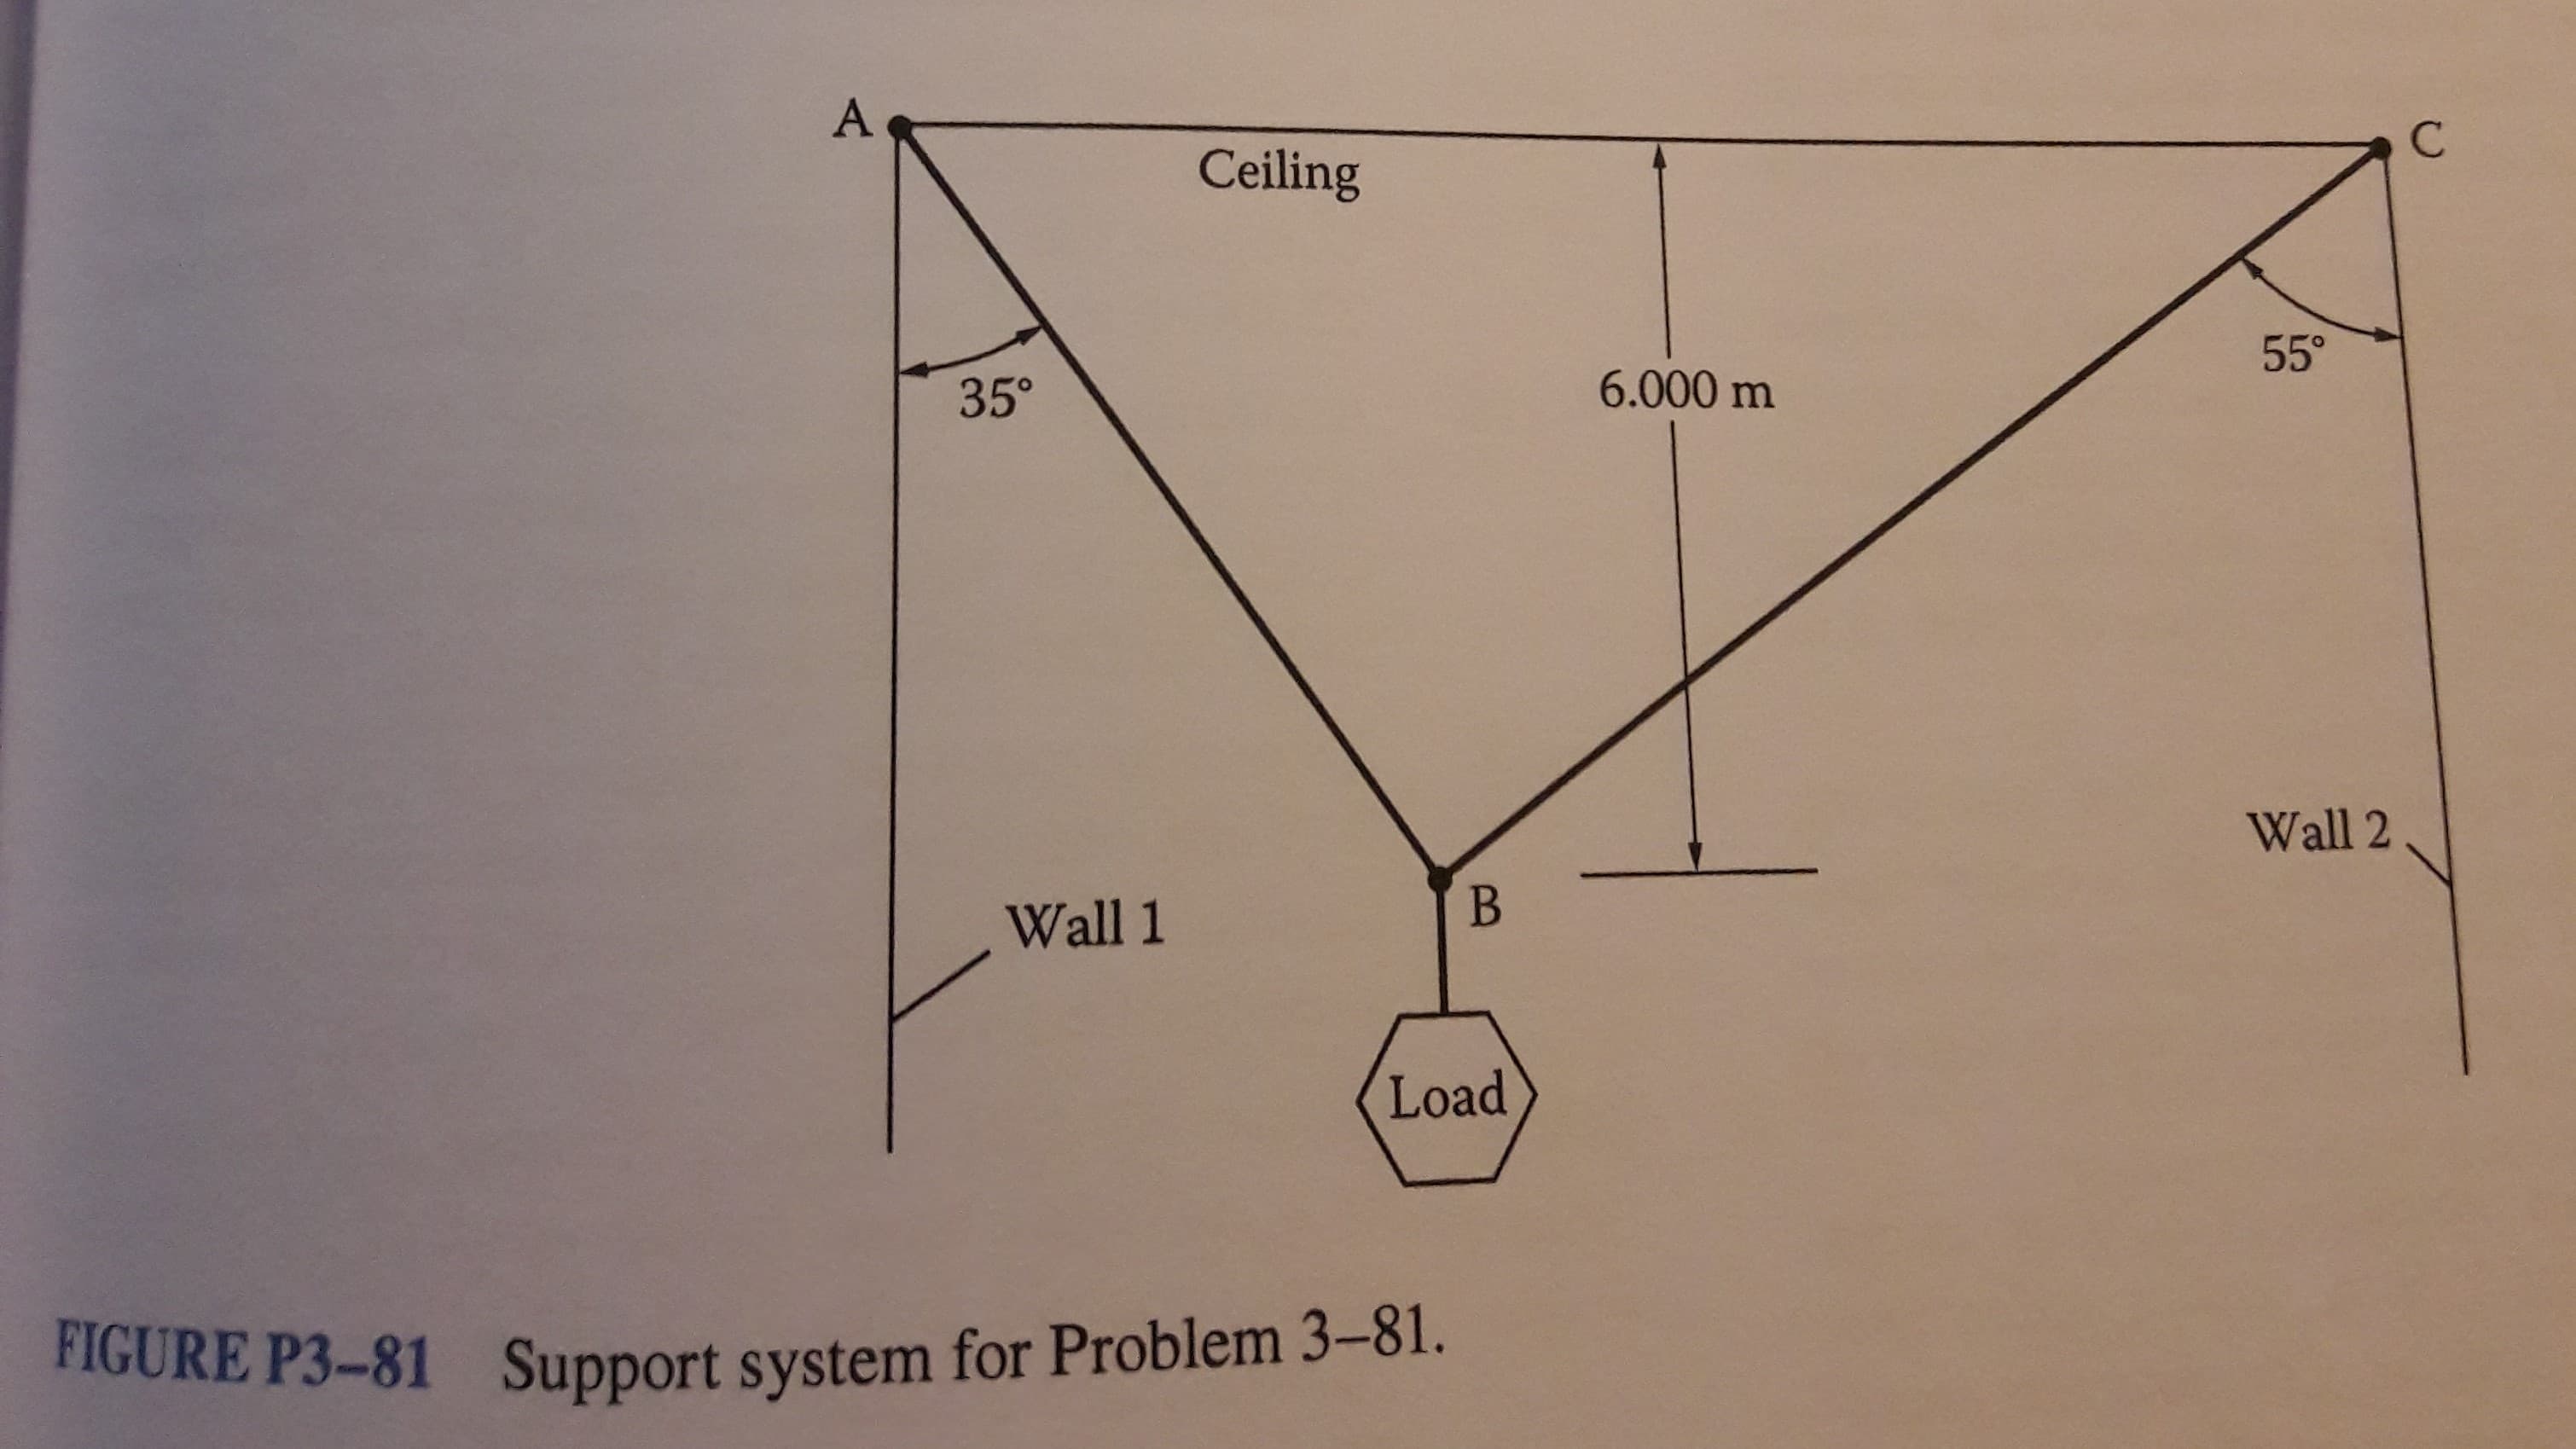 Ceiling
55°
6.000 m
35°
Wall 2
Wall 1
Load
Support system for Problem 3–81.
FIGURE P3-81
